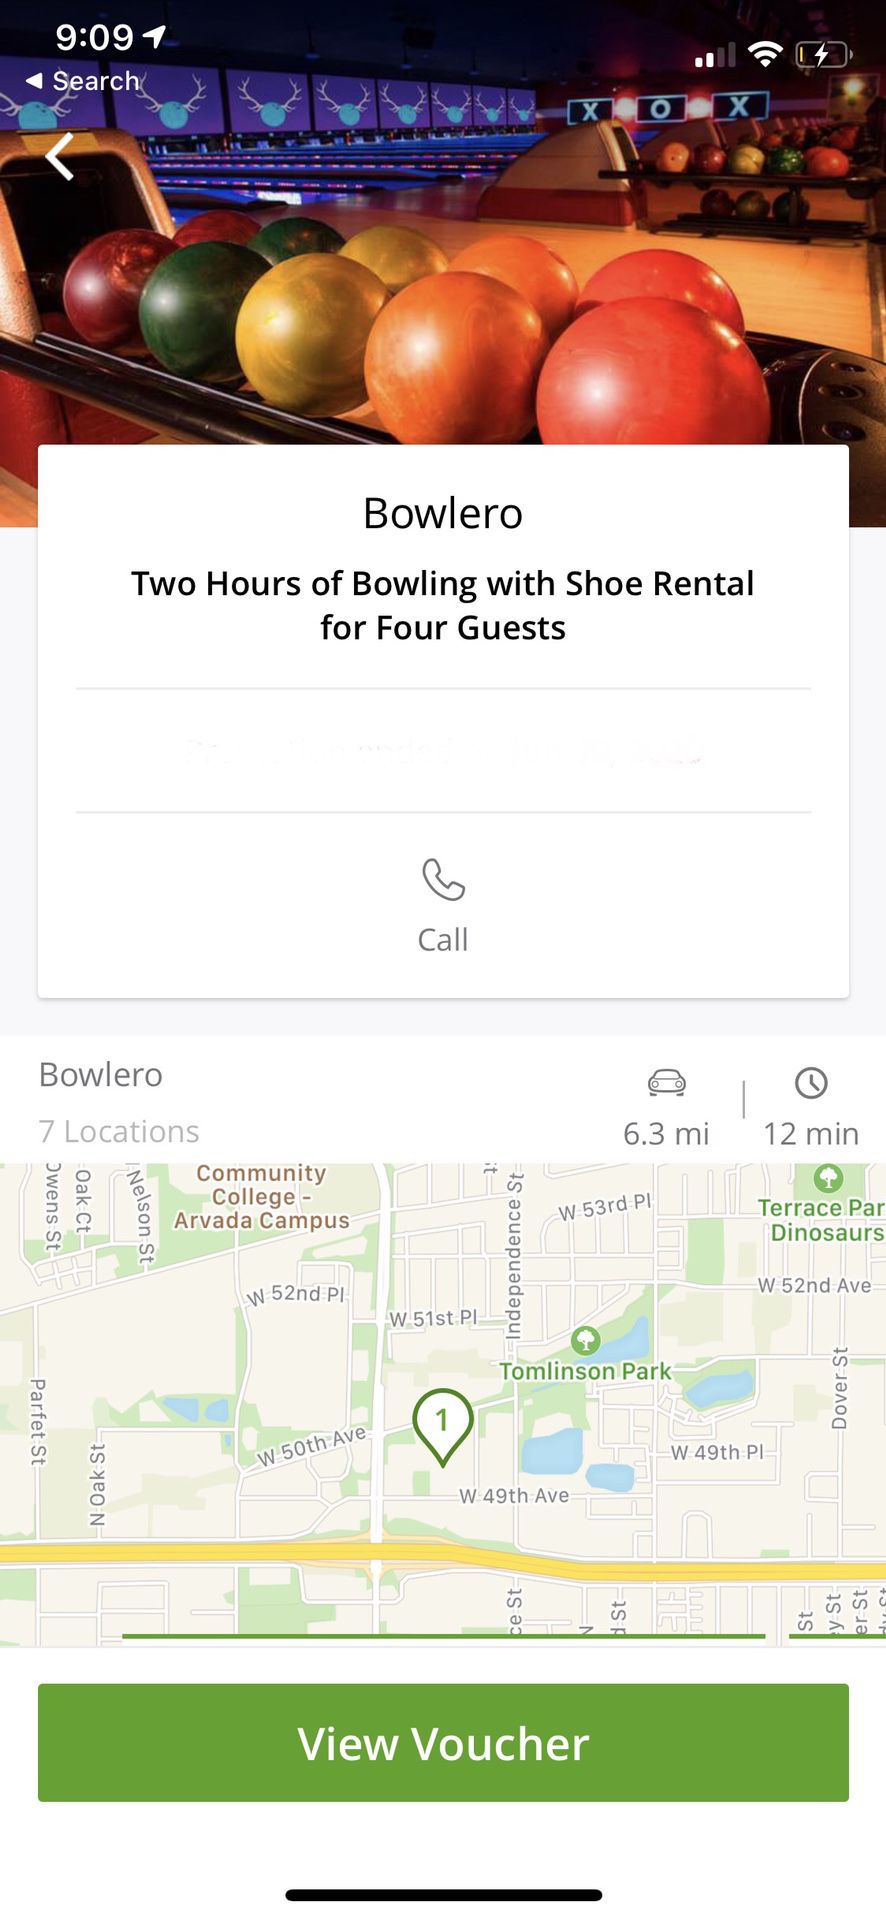 4 Groupons for Bowling @ Bowlero- 2 hrs w shoes for 4 people